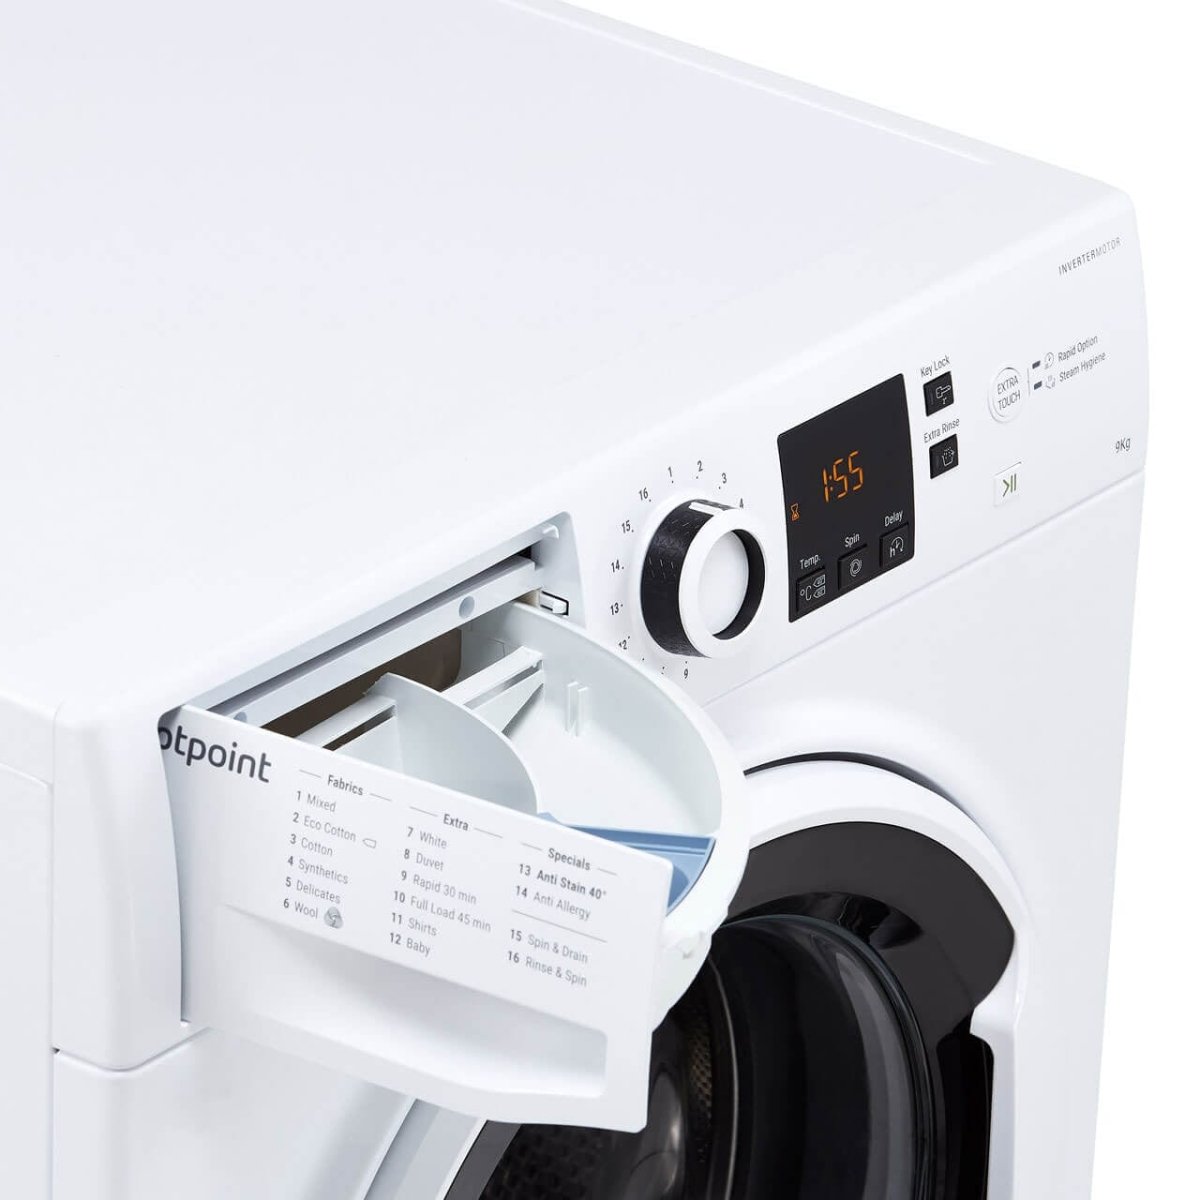 Hotpoint NSWE963CWSUKN 9kg 1600 Spin Washing Machine with Anti Stain - White - Atlantic Electrics